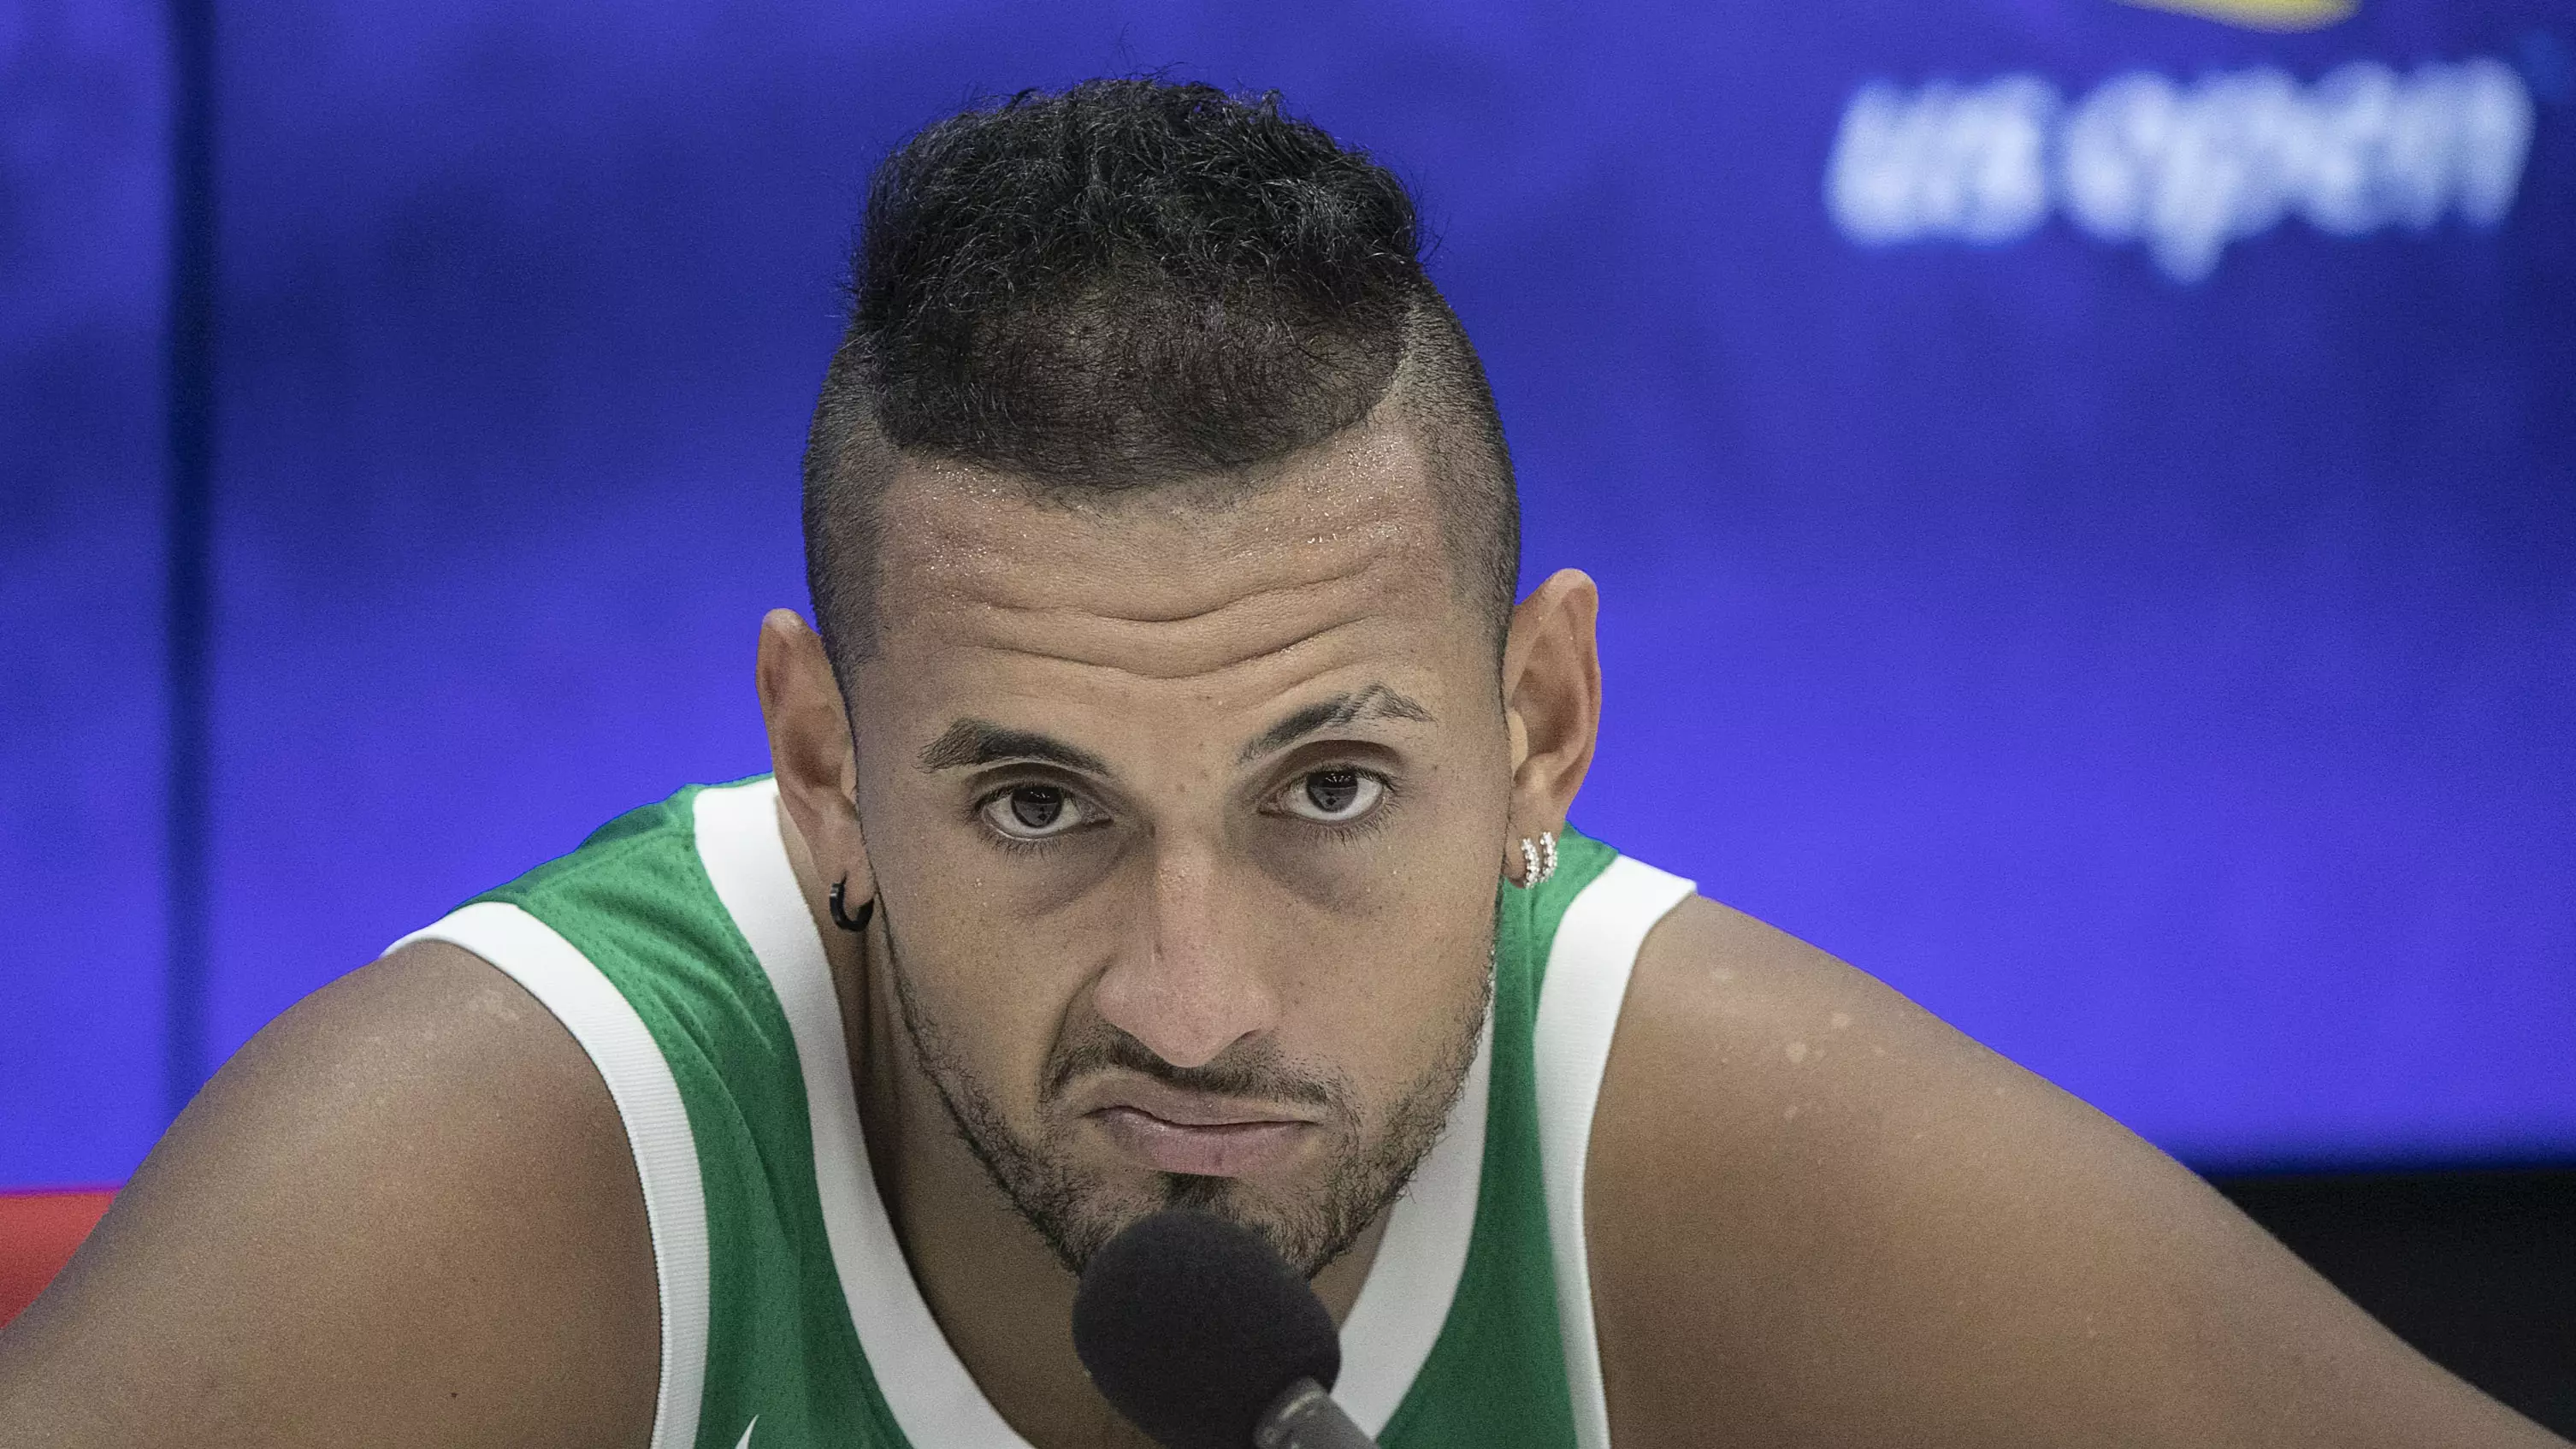 Nick Kyrgios Claims He Lost His Match To Roger Federer Because Of 'Hot Chick' In The Crowd